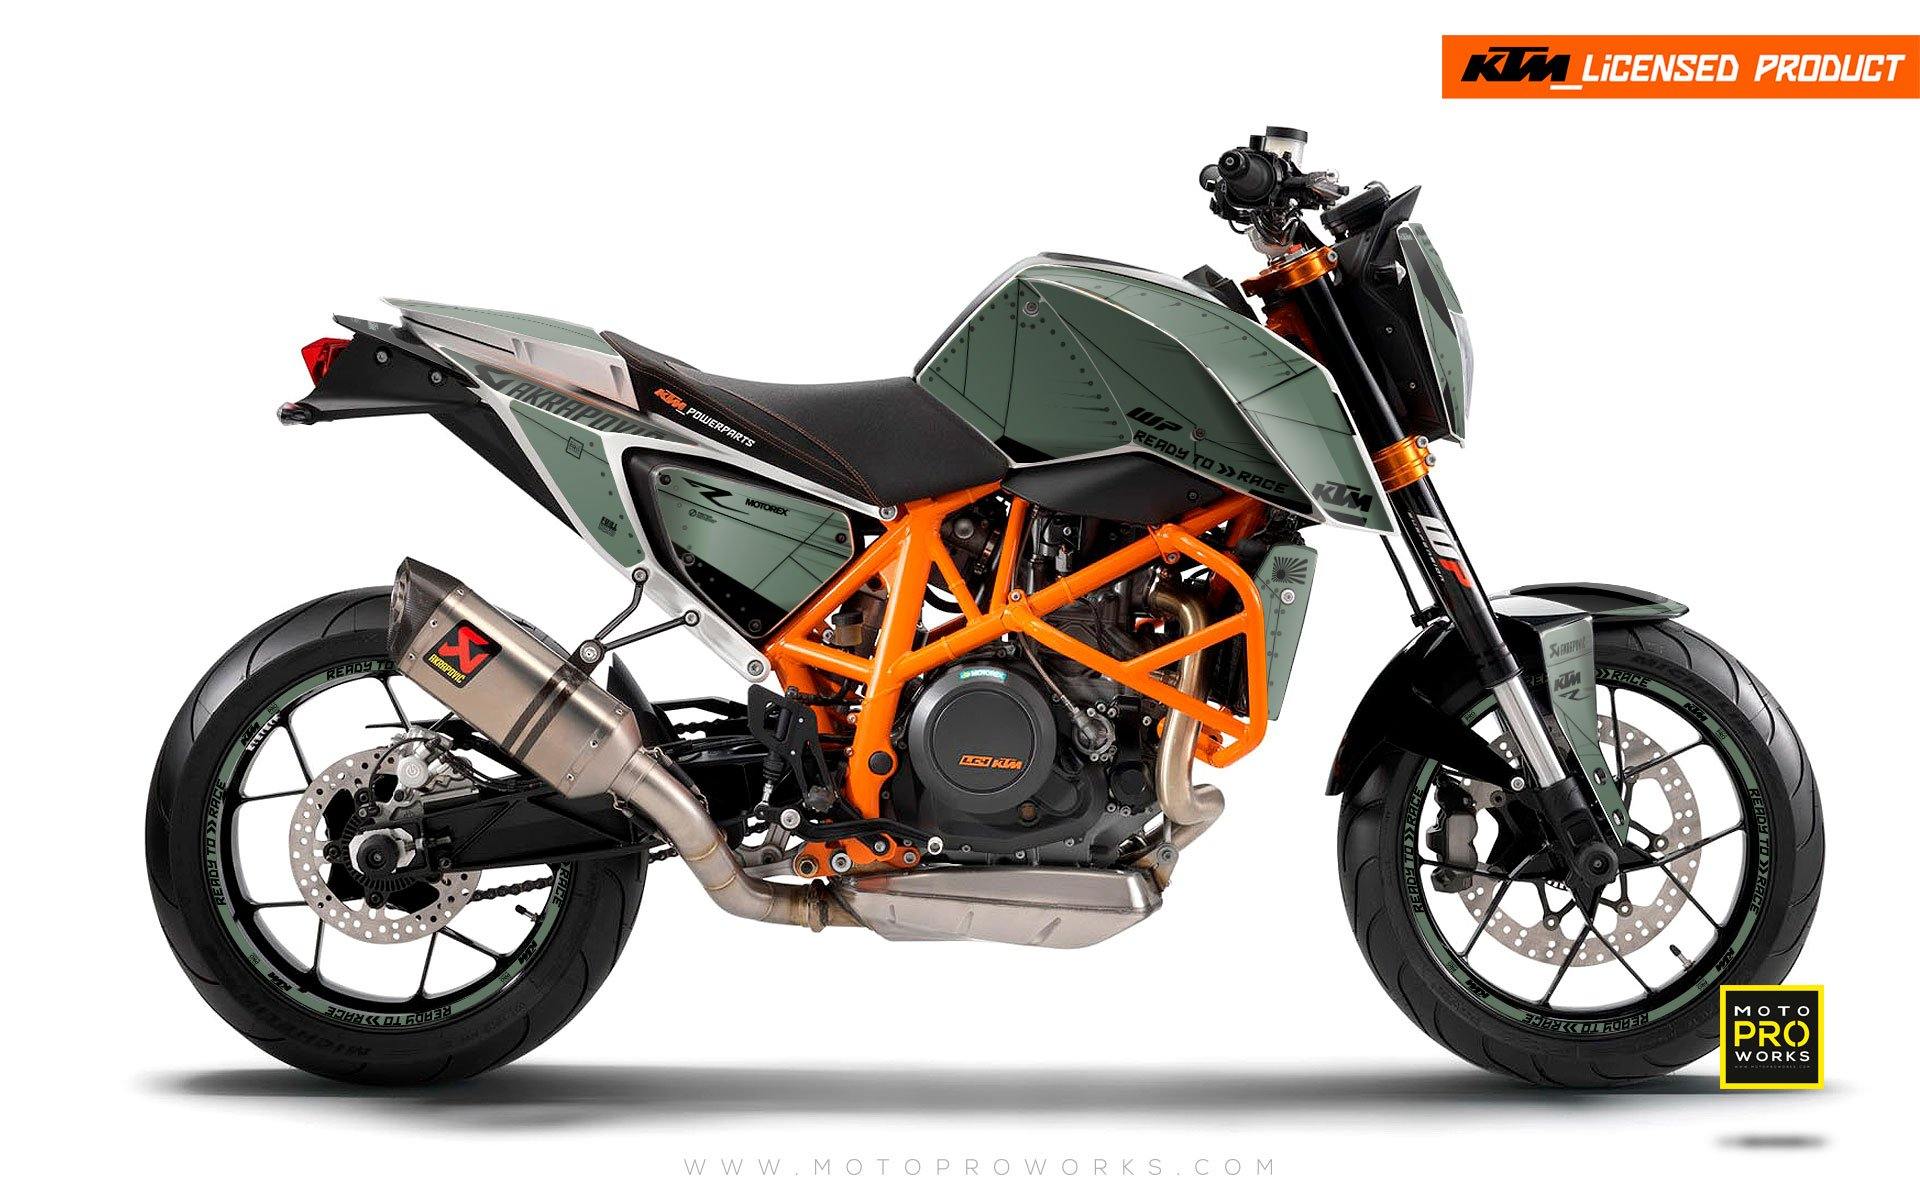 KTM 690 Duke GRAPHIC KIT - "Liberty" (Moss) - MotoProWorks | Decals and Bike Graphic kit